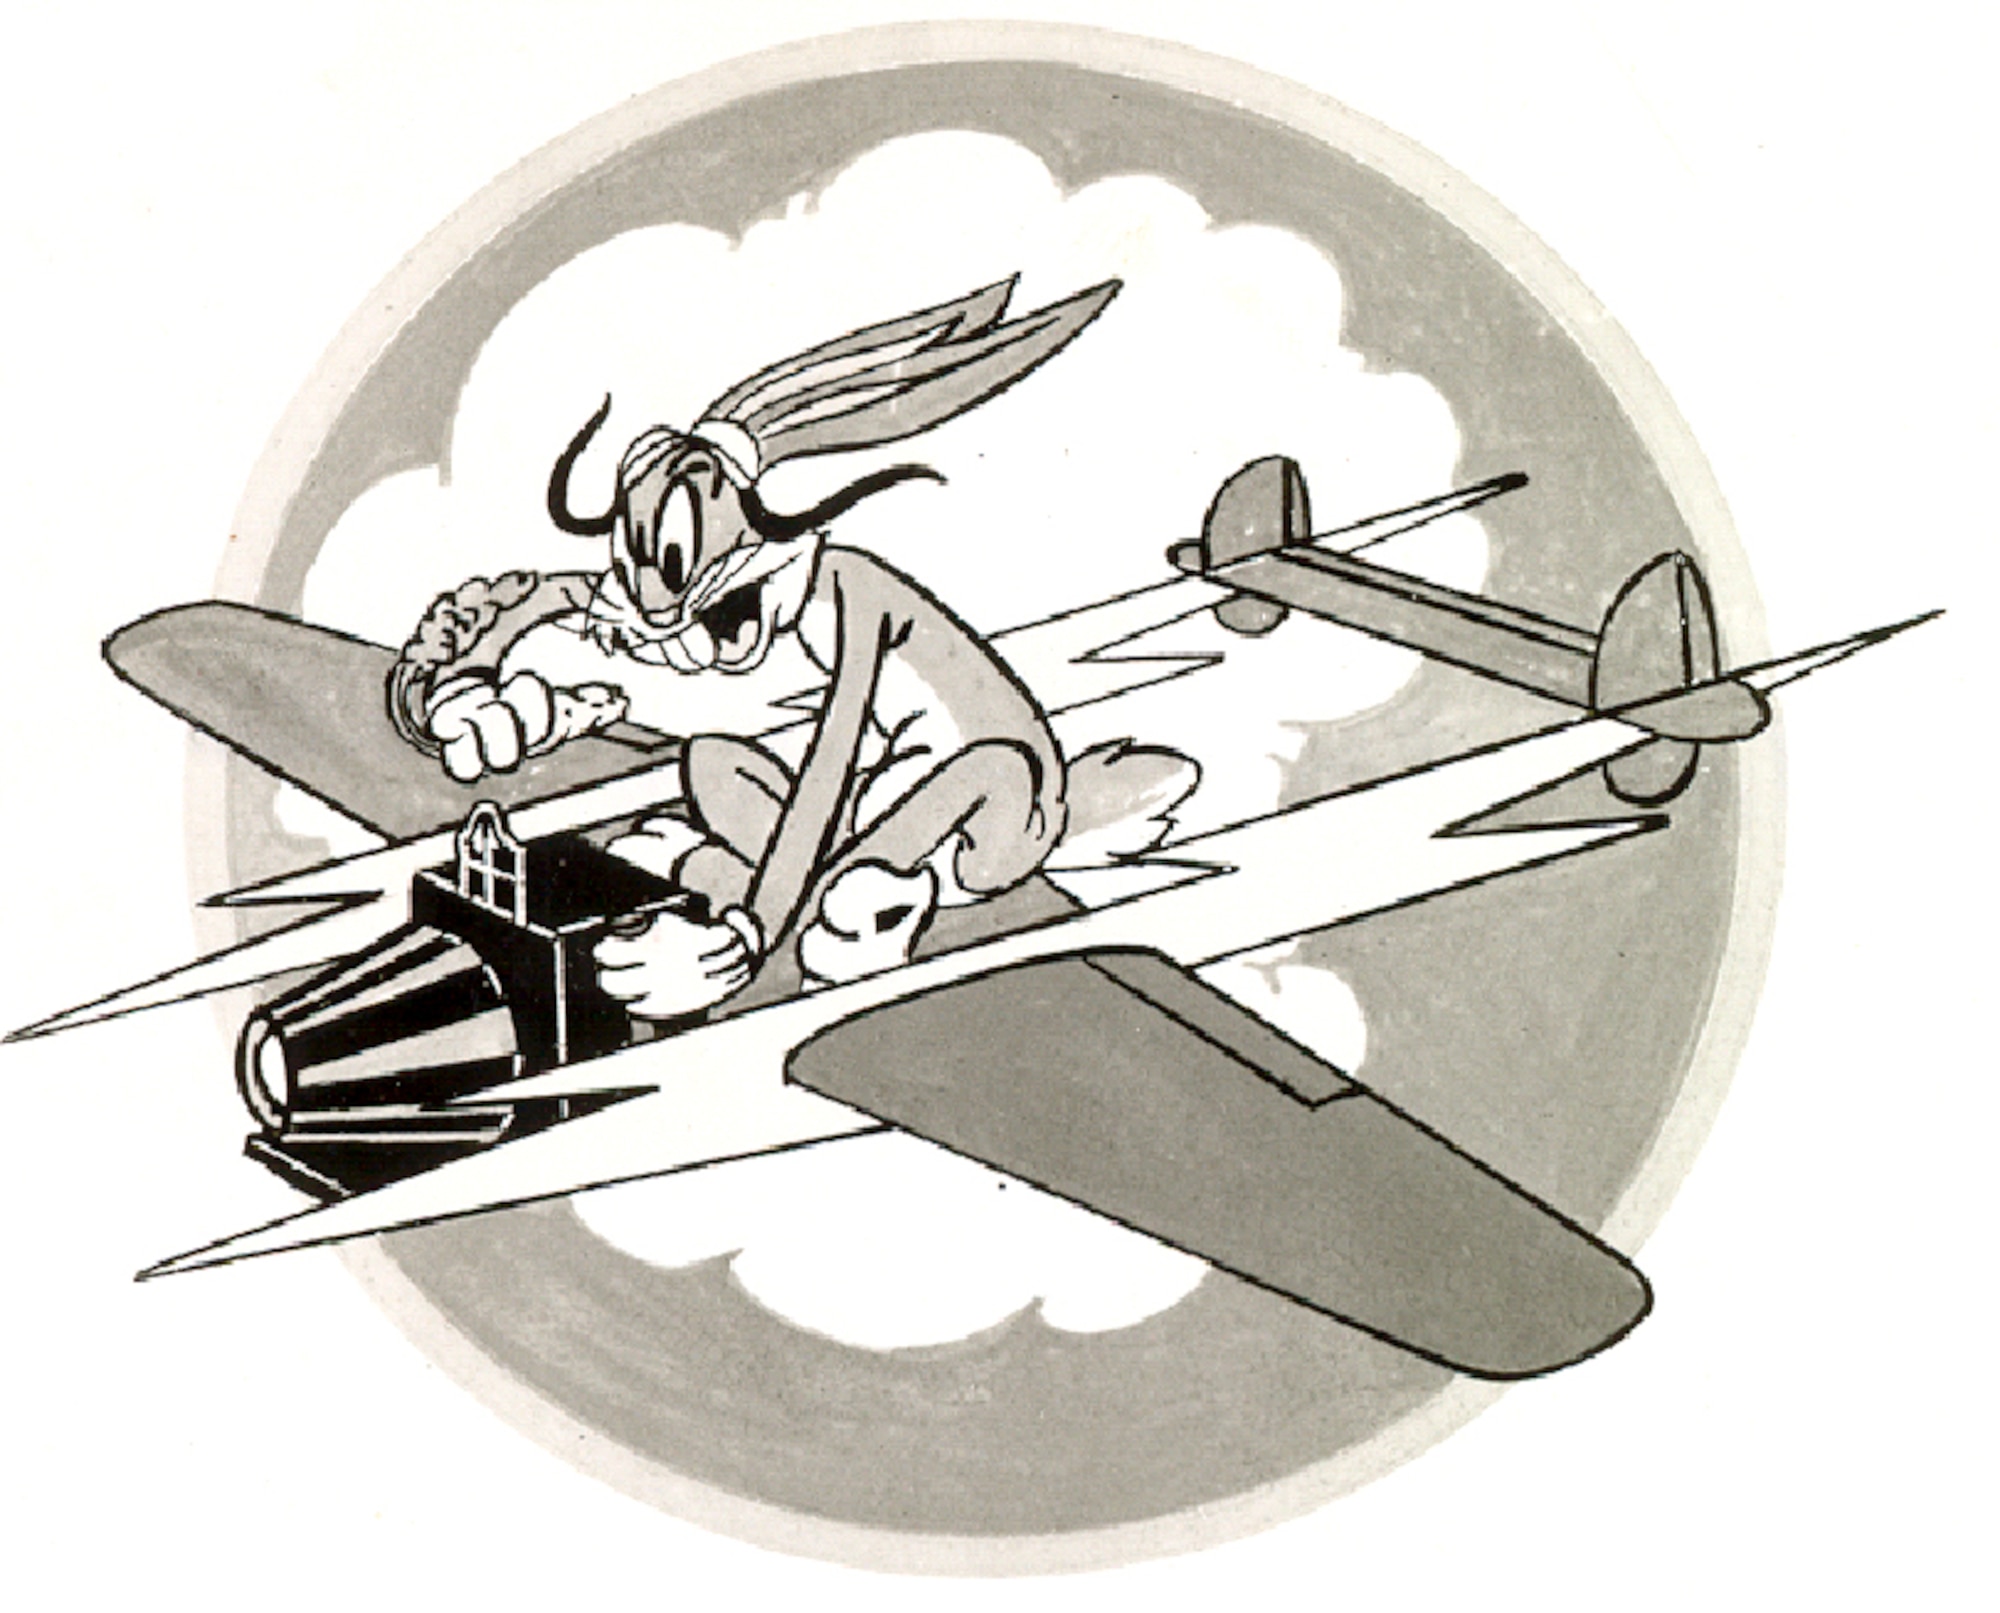 02/02/2007 -- MISAWA AIR BASE, Japan -- This emblem was approved for the 14th Photographic Reconnaissance Squadron in 1943. (U.S. Air Force graphic)